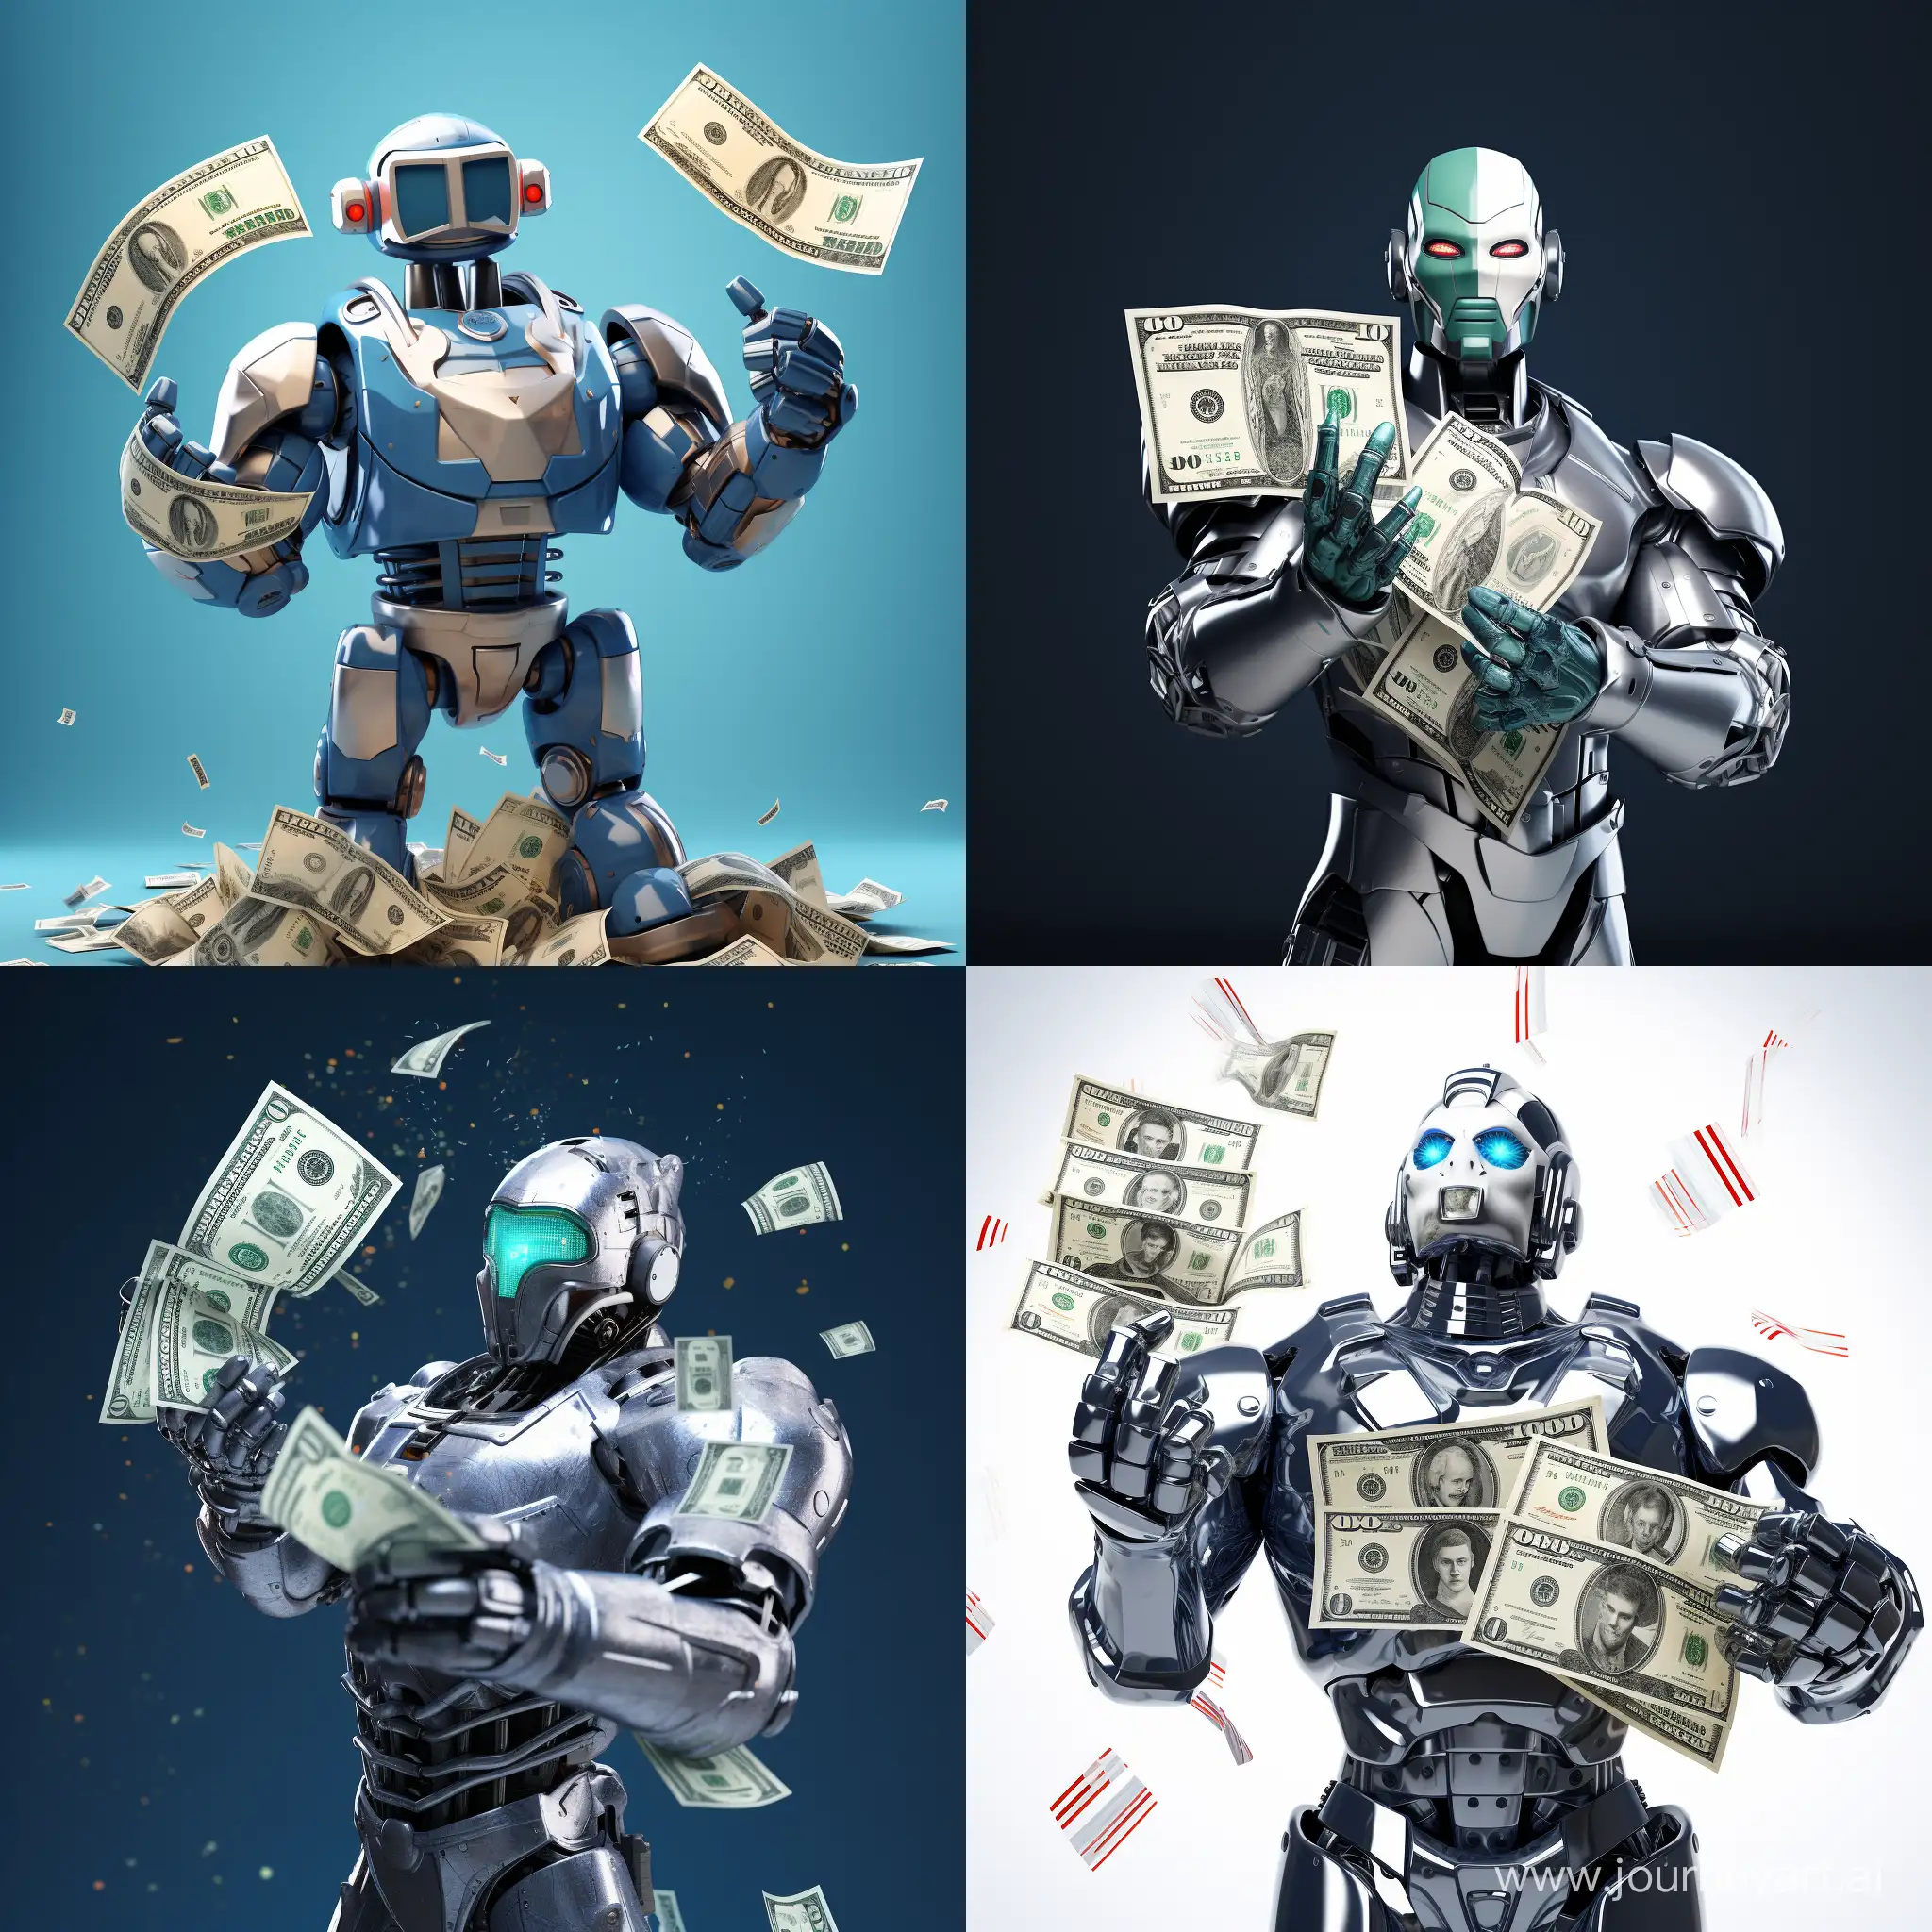 The robot holds American dollars in its hands